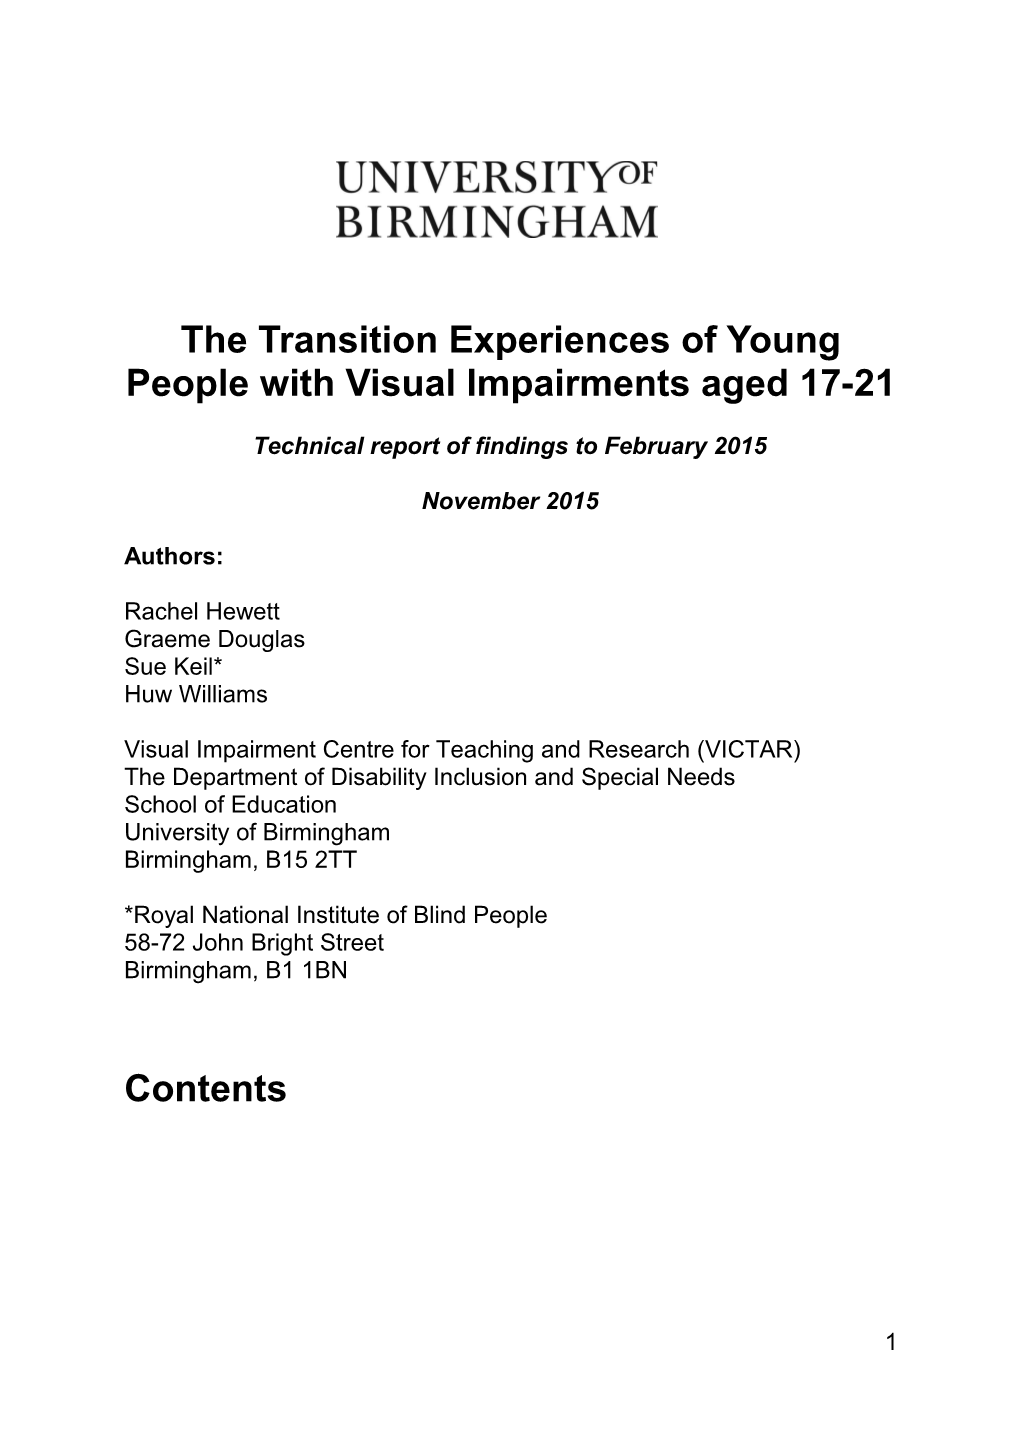 The Transition Experiences of Young People with Visual Impairments Aged 17-21